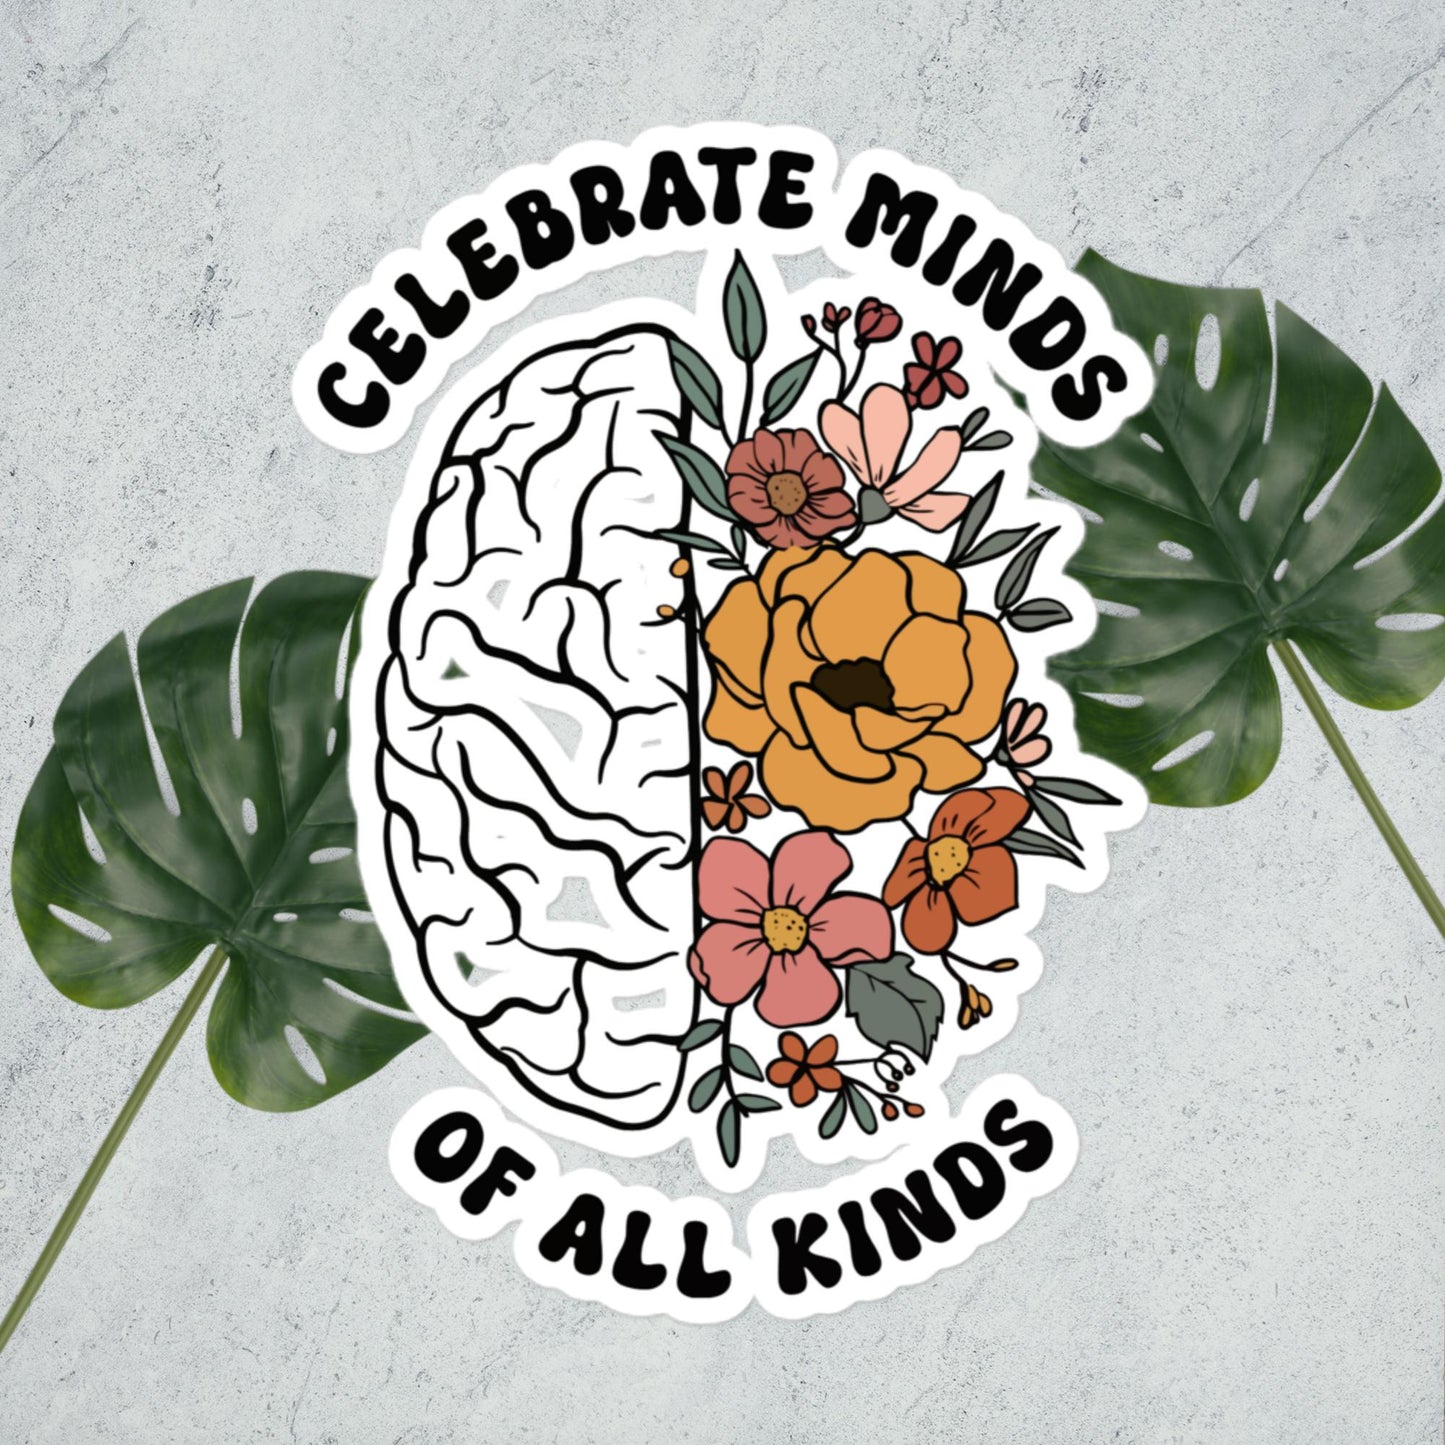 Celebrate Minds of All Kinds - Stickers